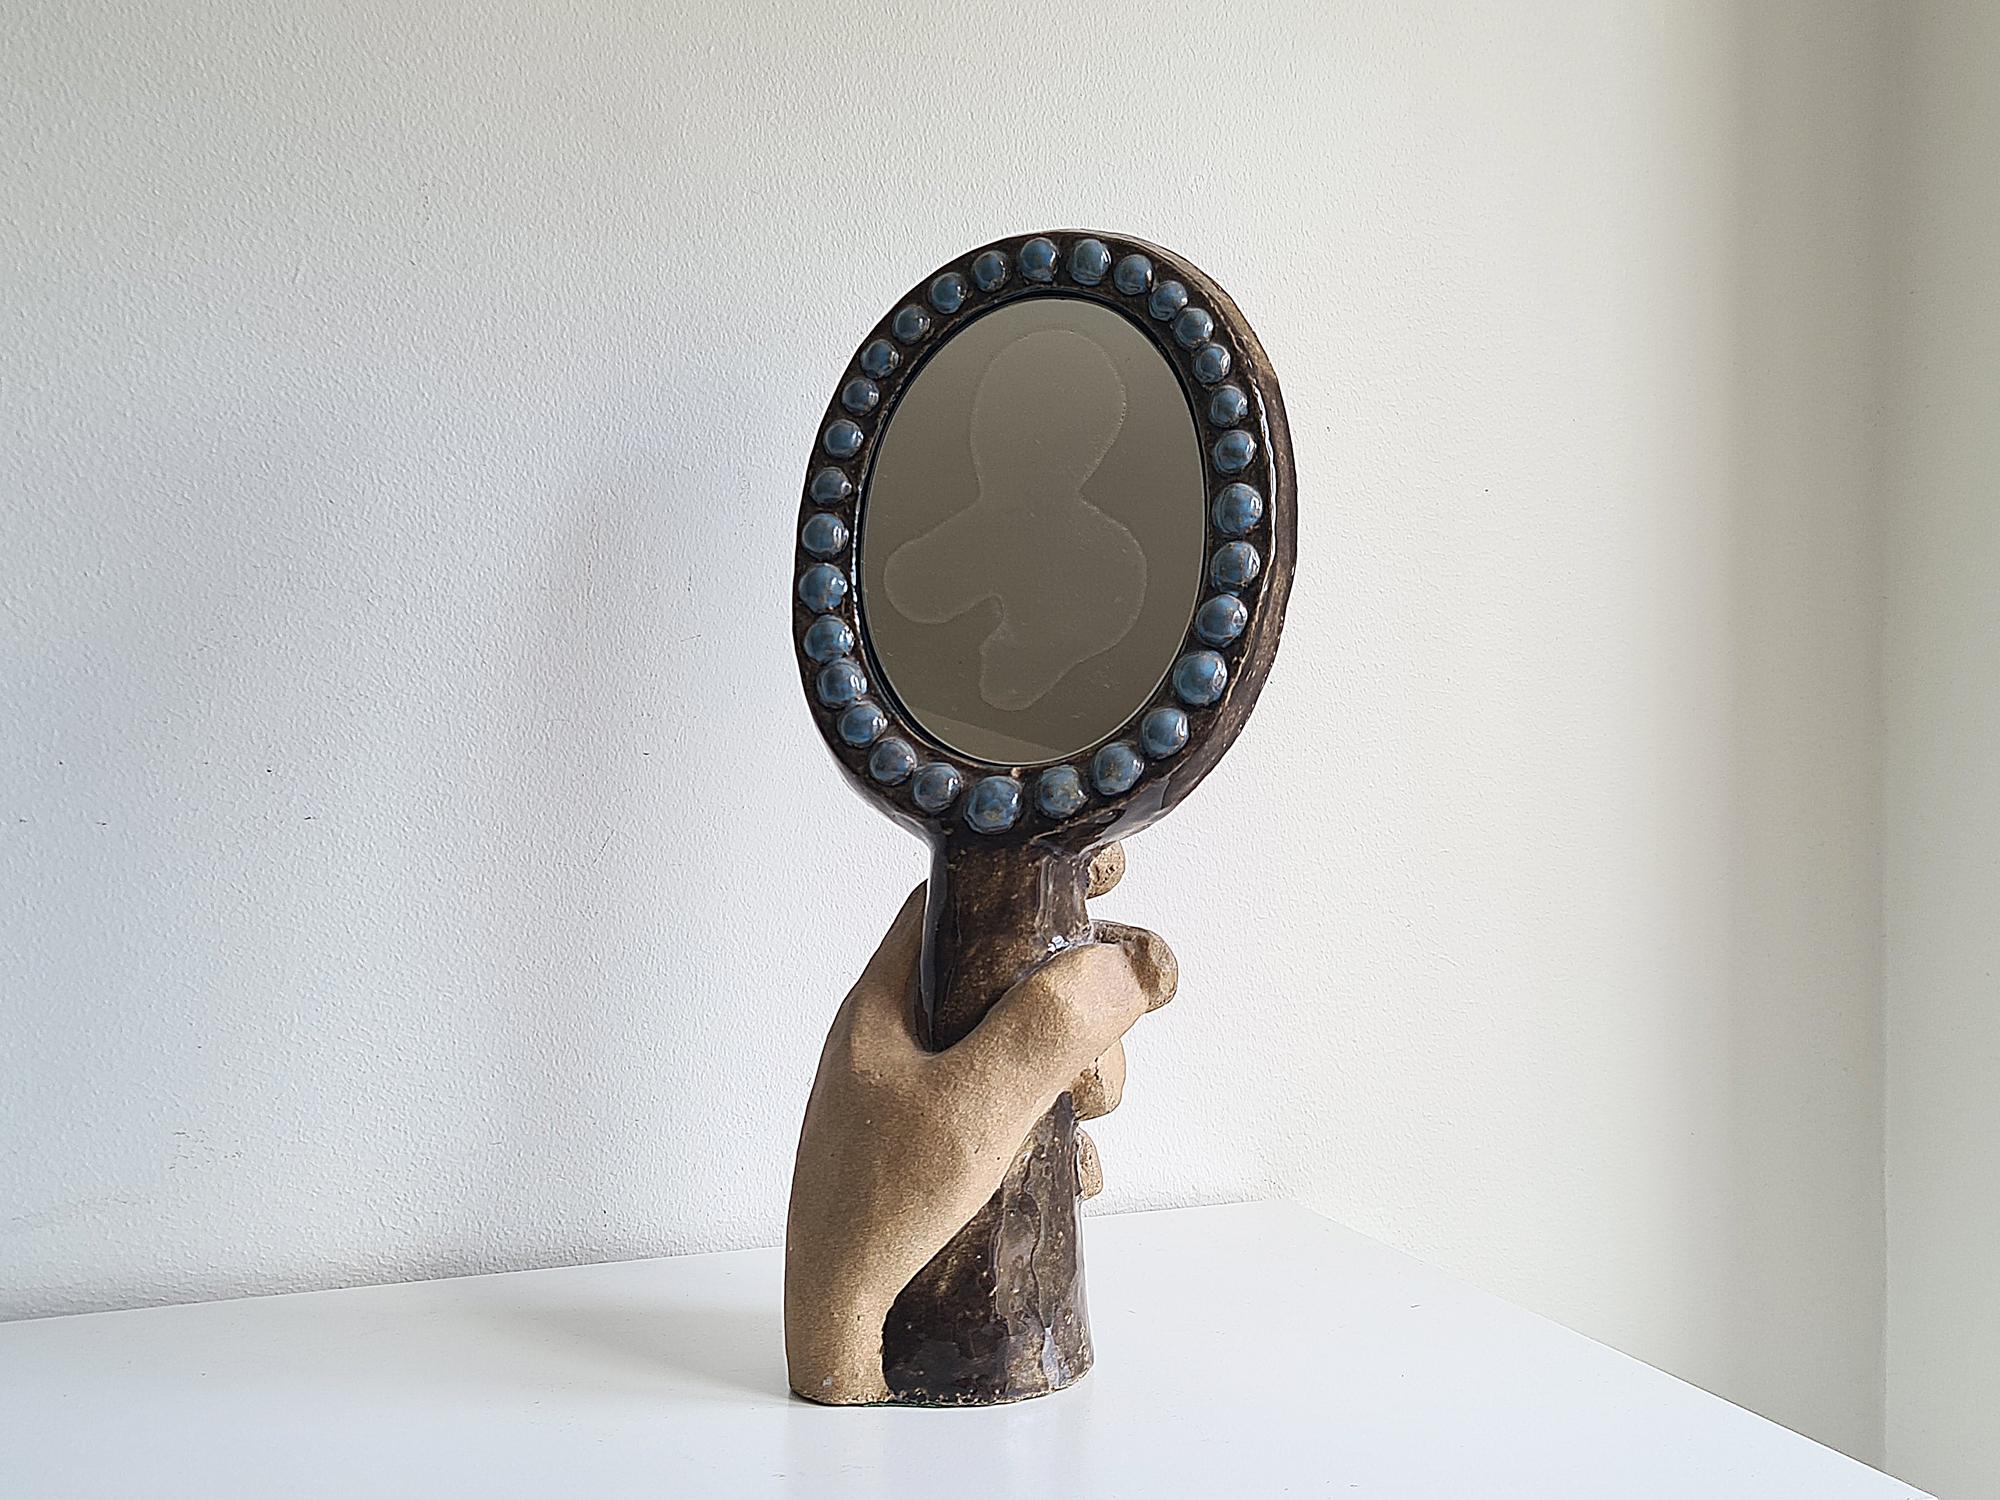 Cool and rare sculpture/mirror, possibly unique by Stig Carlsson.
Stig Carlsson was a swedish sculptor/designer. During his early career he was an apprentice to Gunnar Nylund at Rörstrand. In the mid 70's he opened up his own studio, Nyhamnsläge,